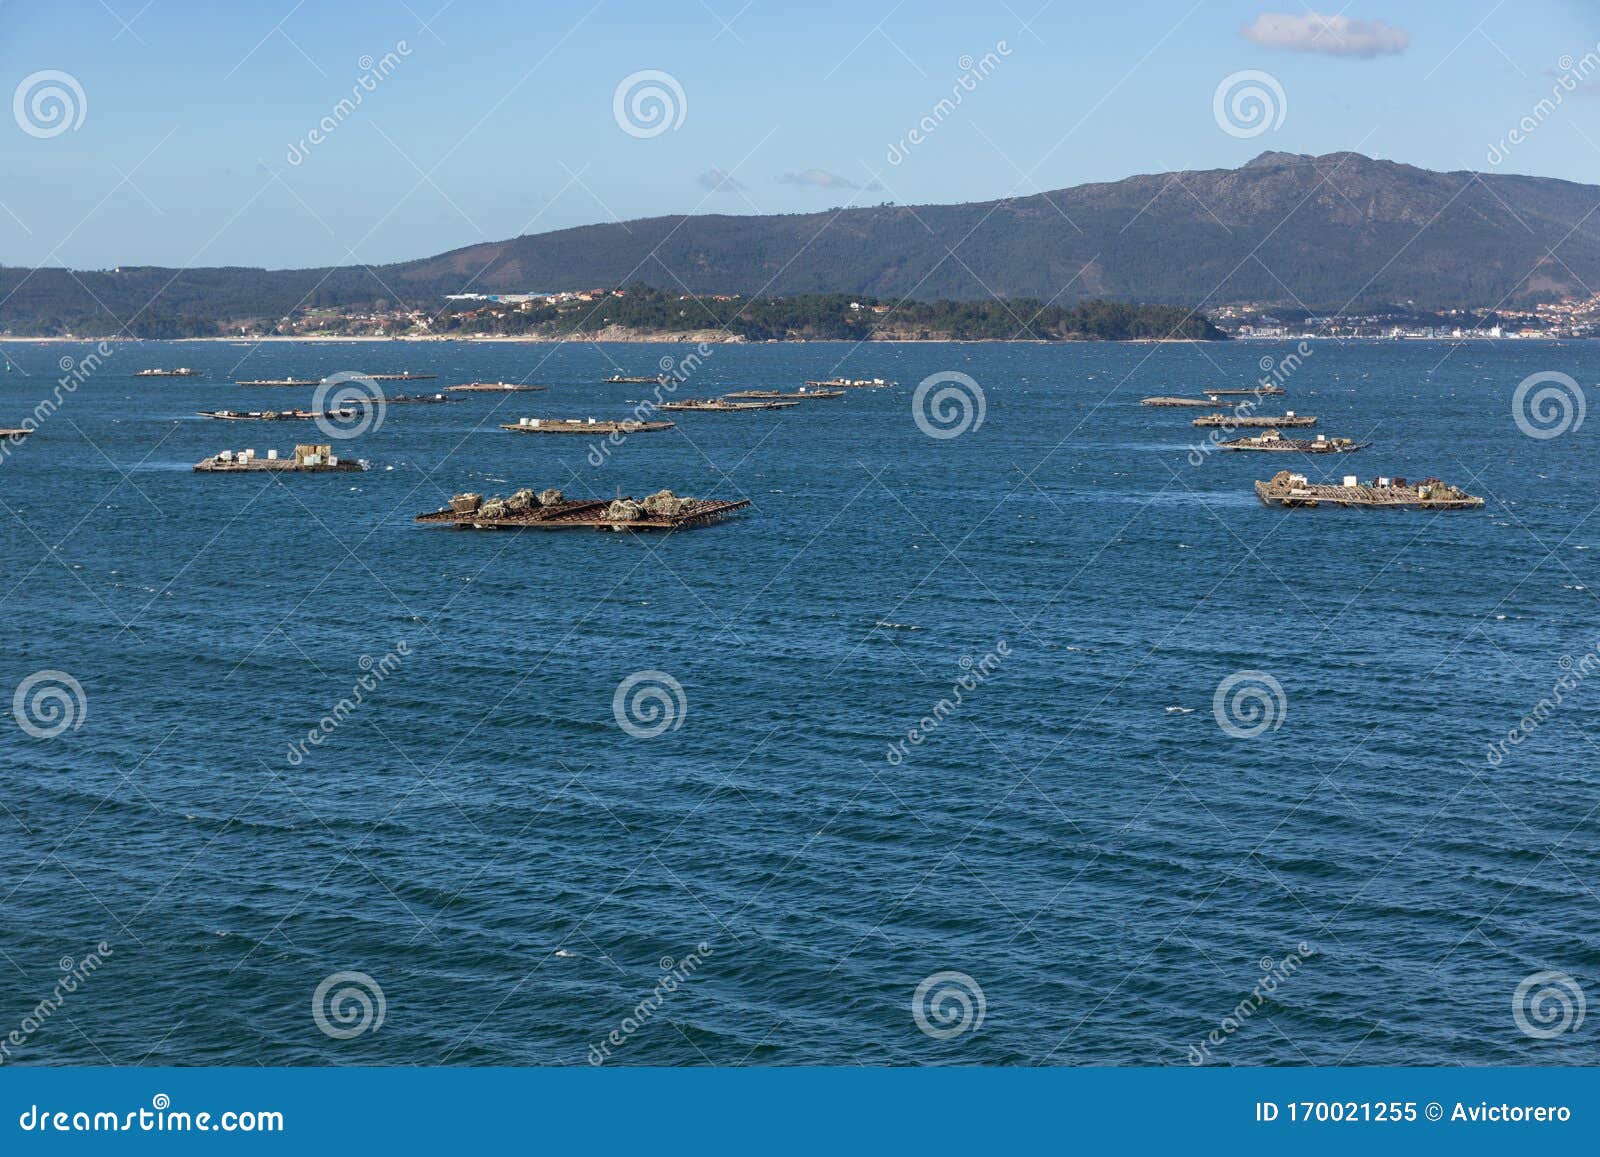 Landscape Of The Ria De Arousa With Numerous Platforms For The